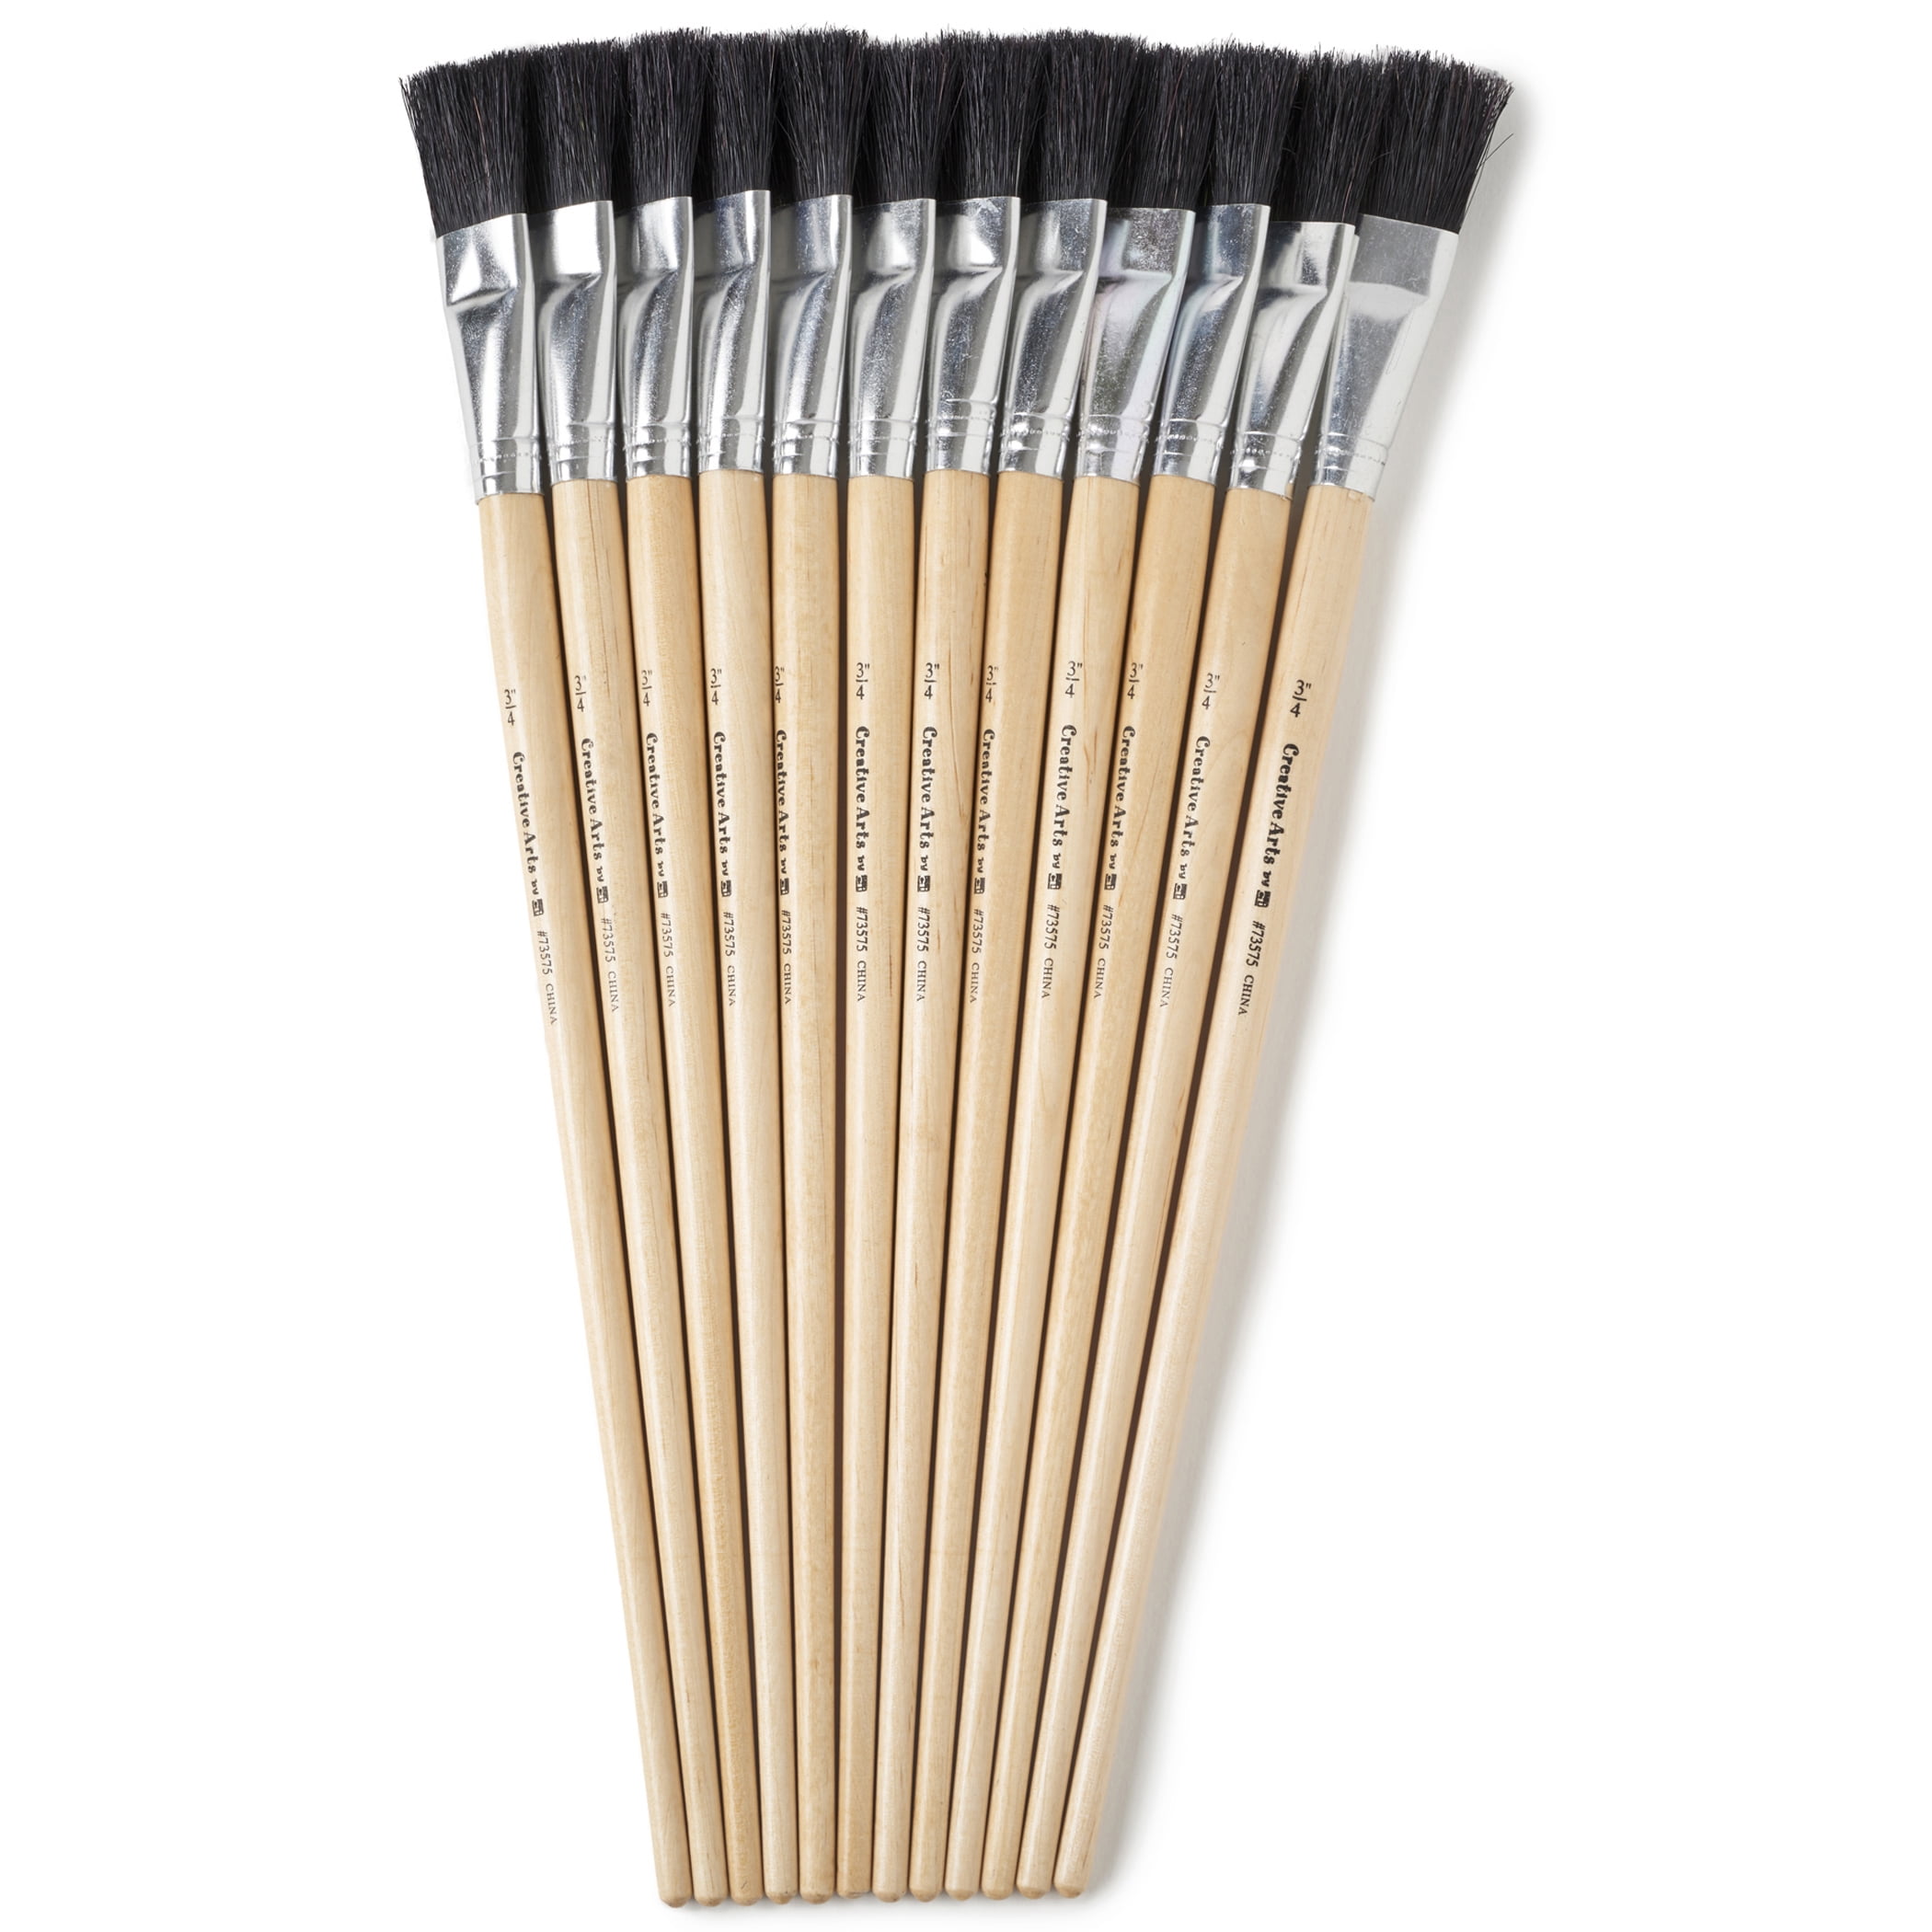 Creative Mark Scrubber Watercolor Brushes - Professional